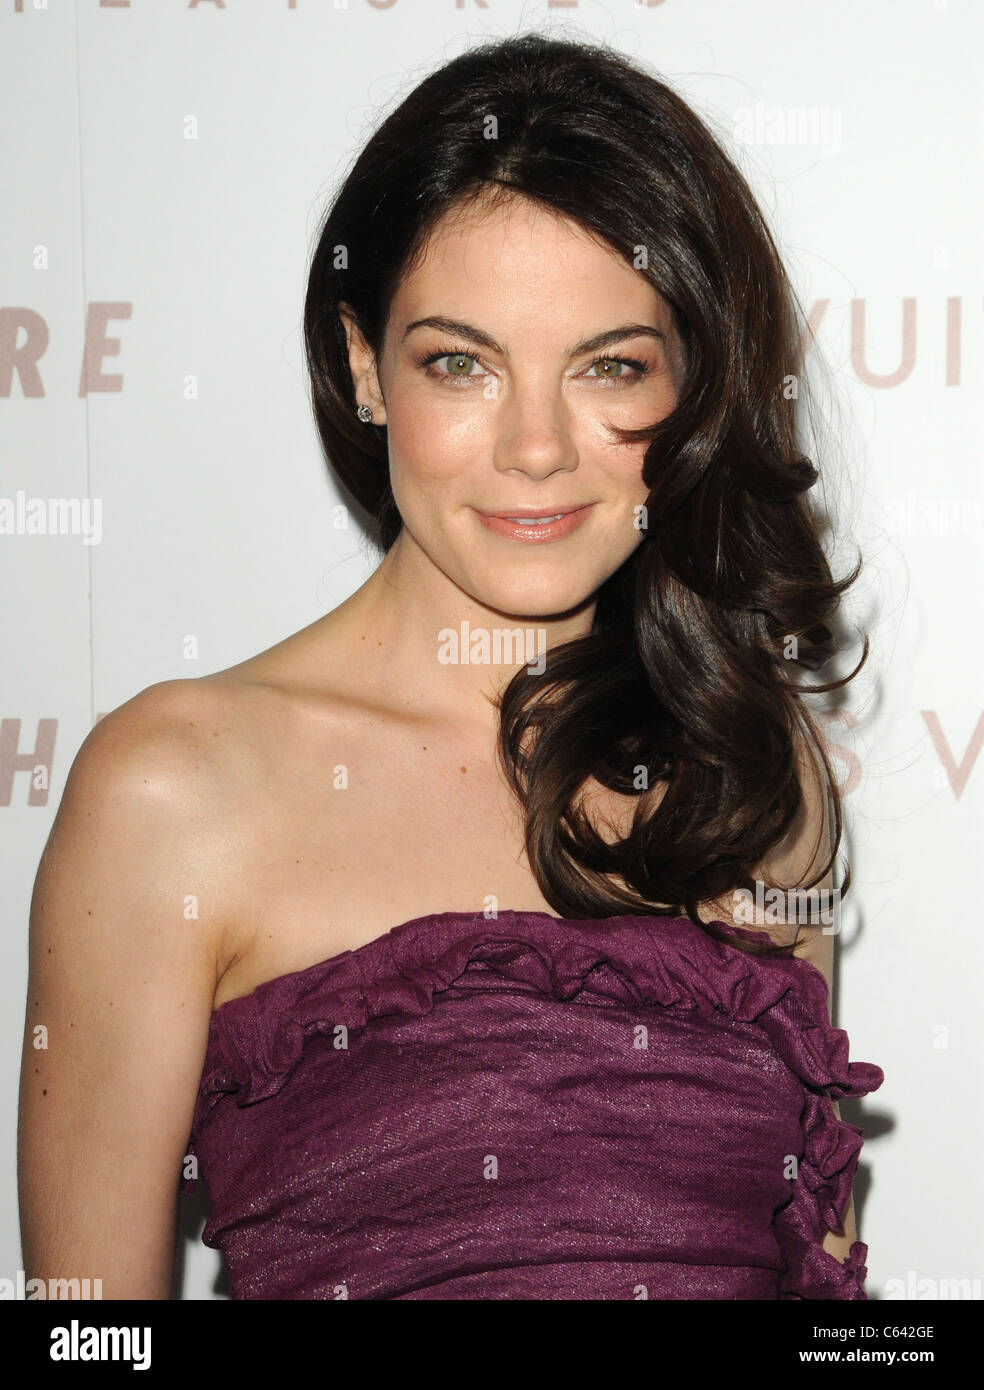 Michelle Monaghan at arrivals for SOMEWHERE Premiere, Arclight Hollywood, Los Angeles, CA December 7, 2010. Photo By: Dee Cercone/Everett Collection Stock Photo